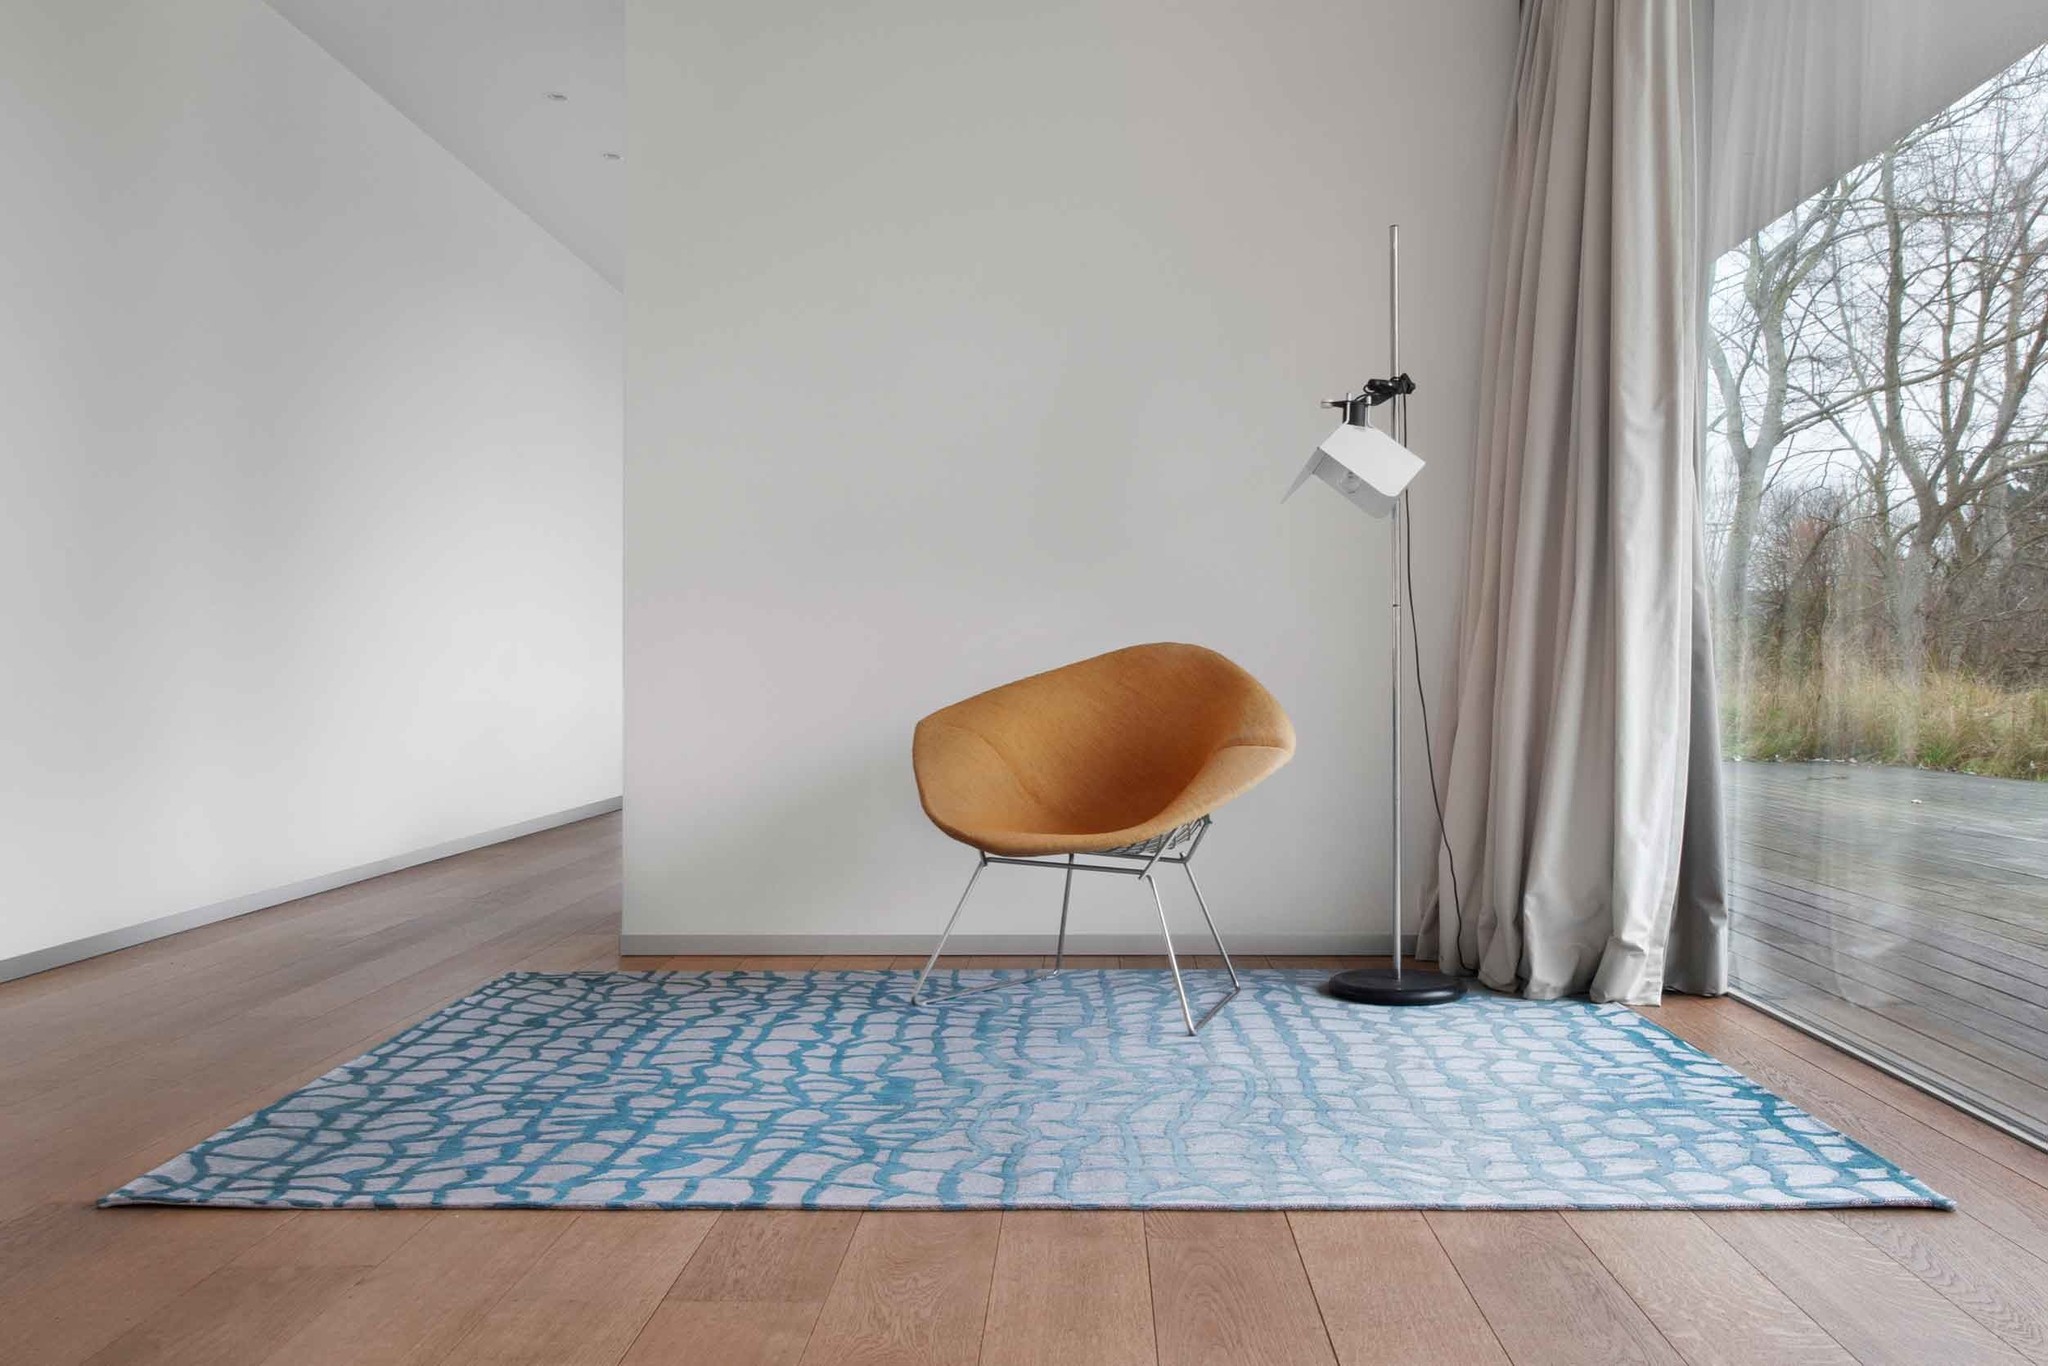 Abstract Blue Flatwoven Rug ☞ Size: 170 x 240 cm